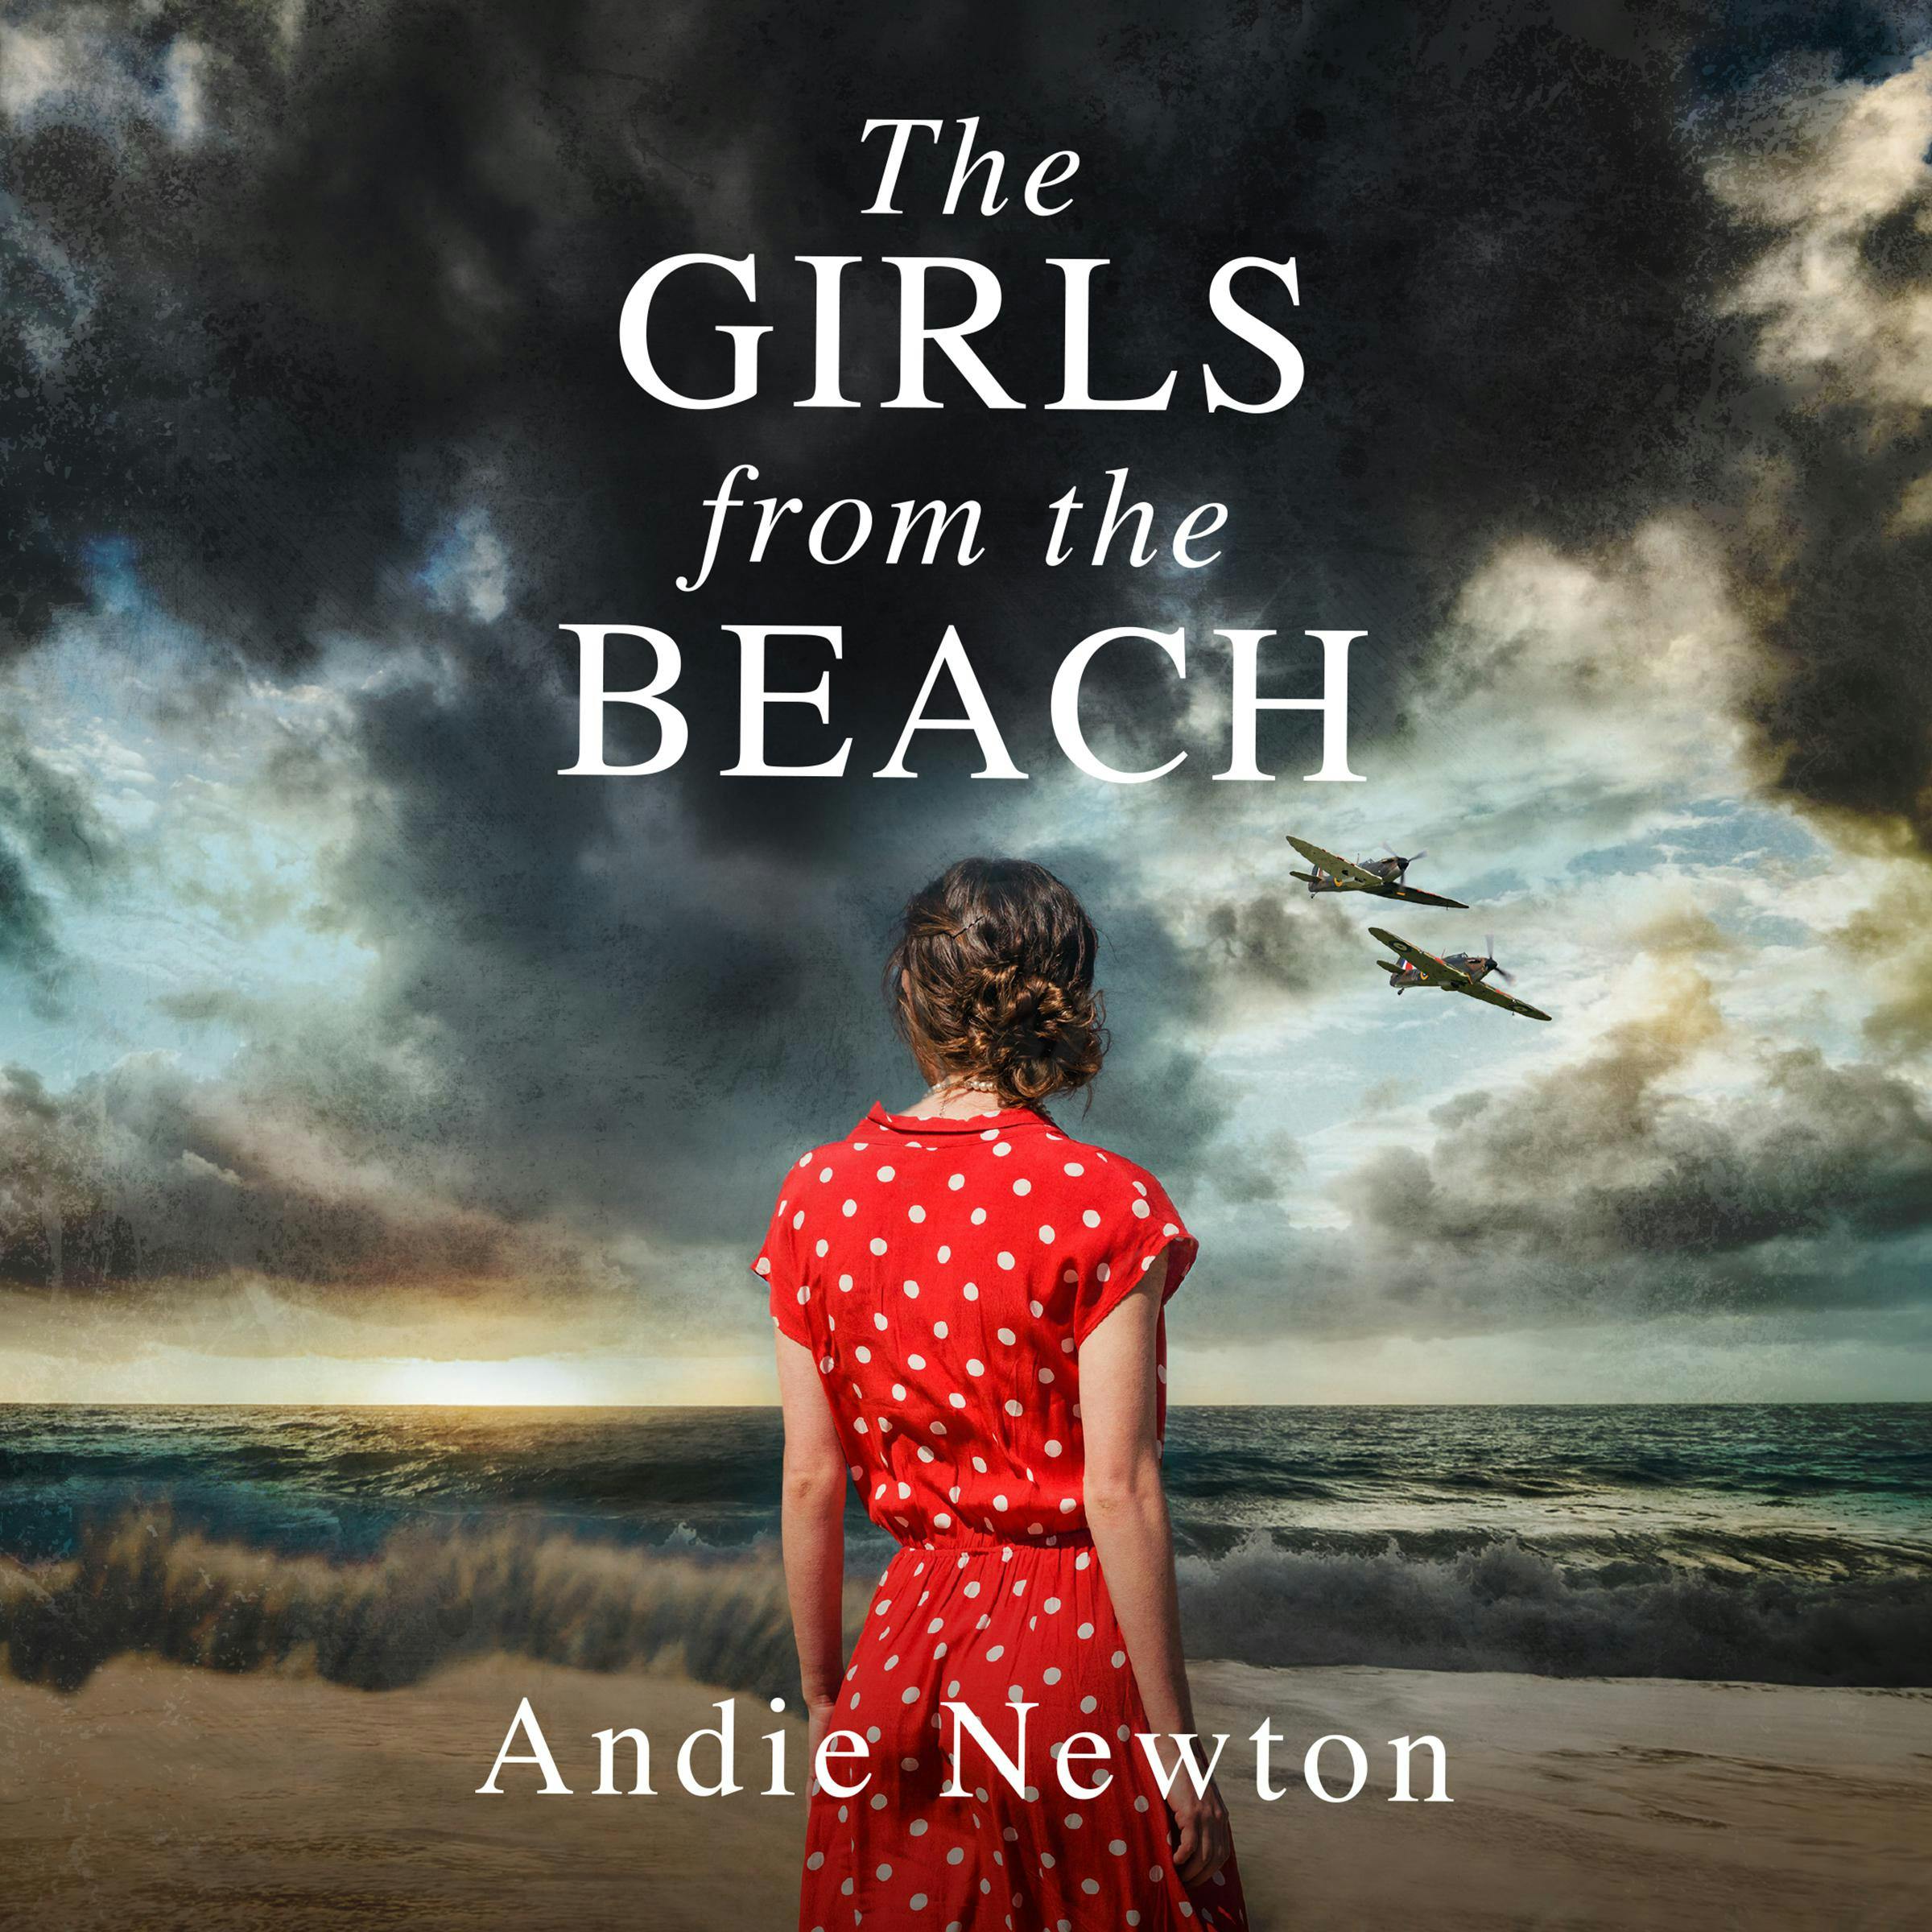 The Girls from the Beach - Andie Newton